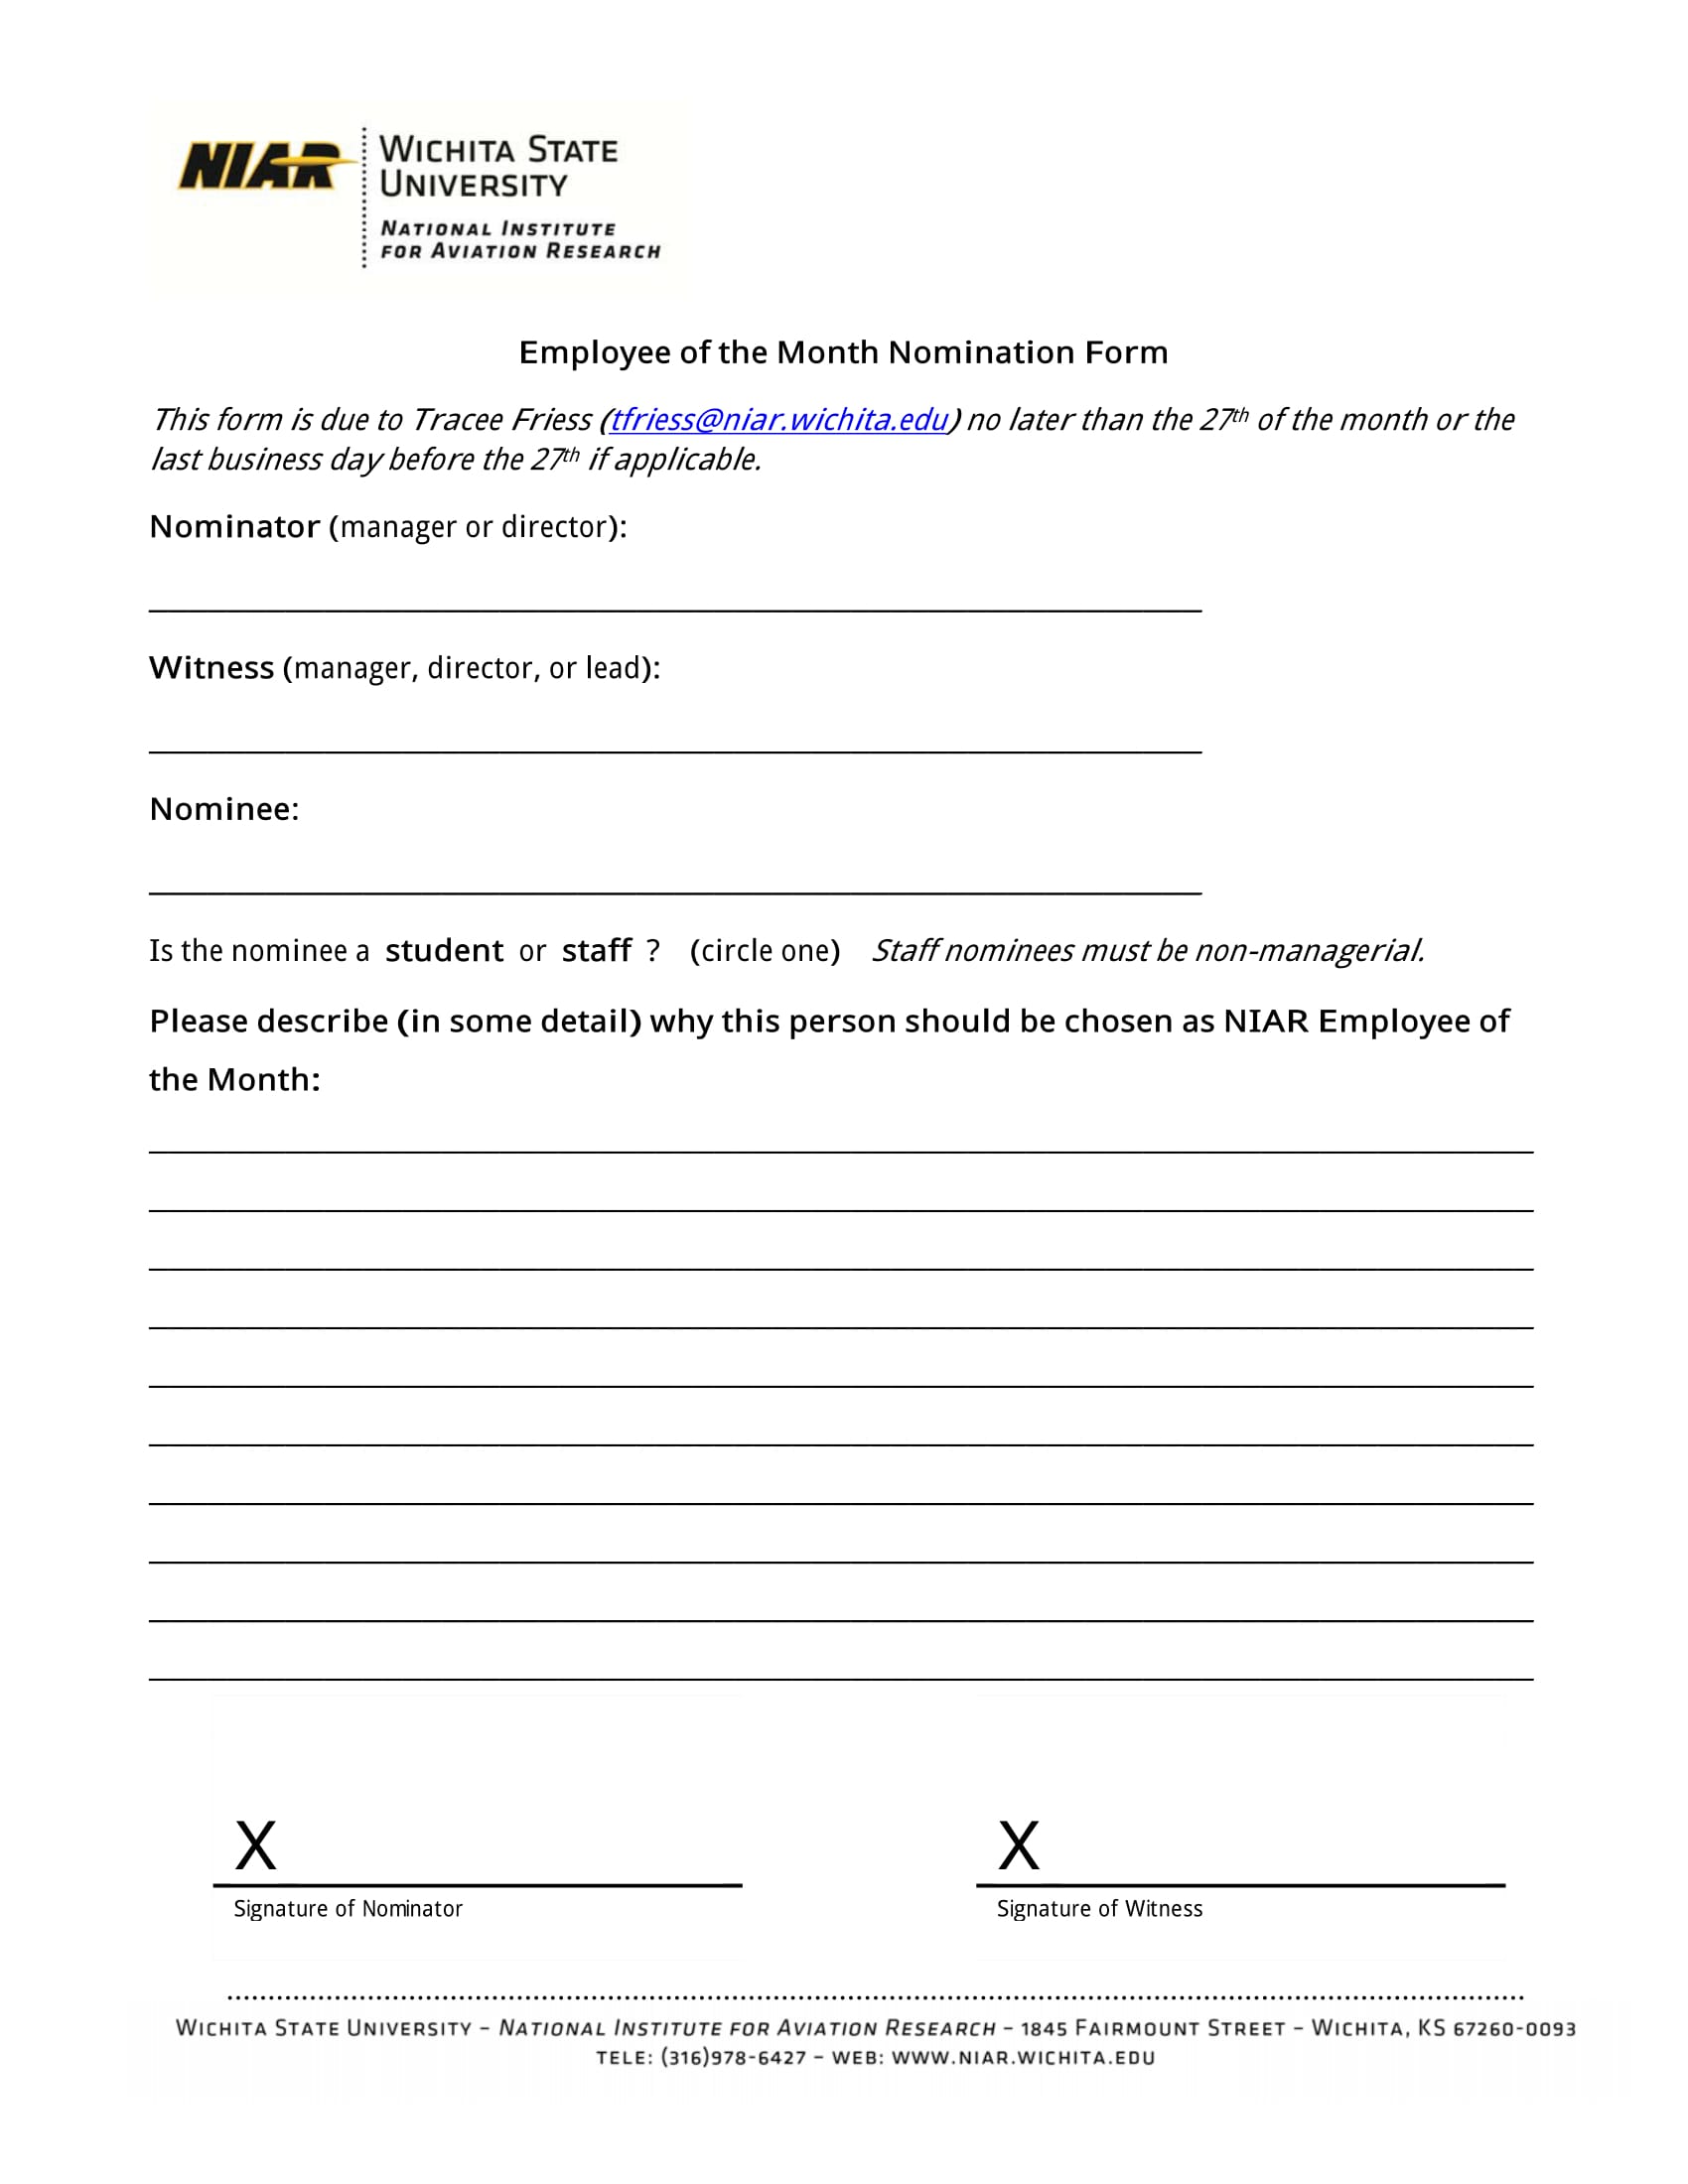 standard employee of the month vote form 1